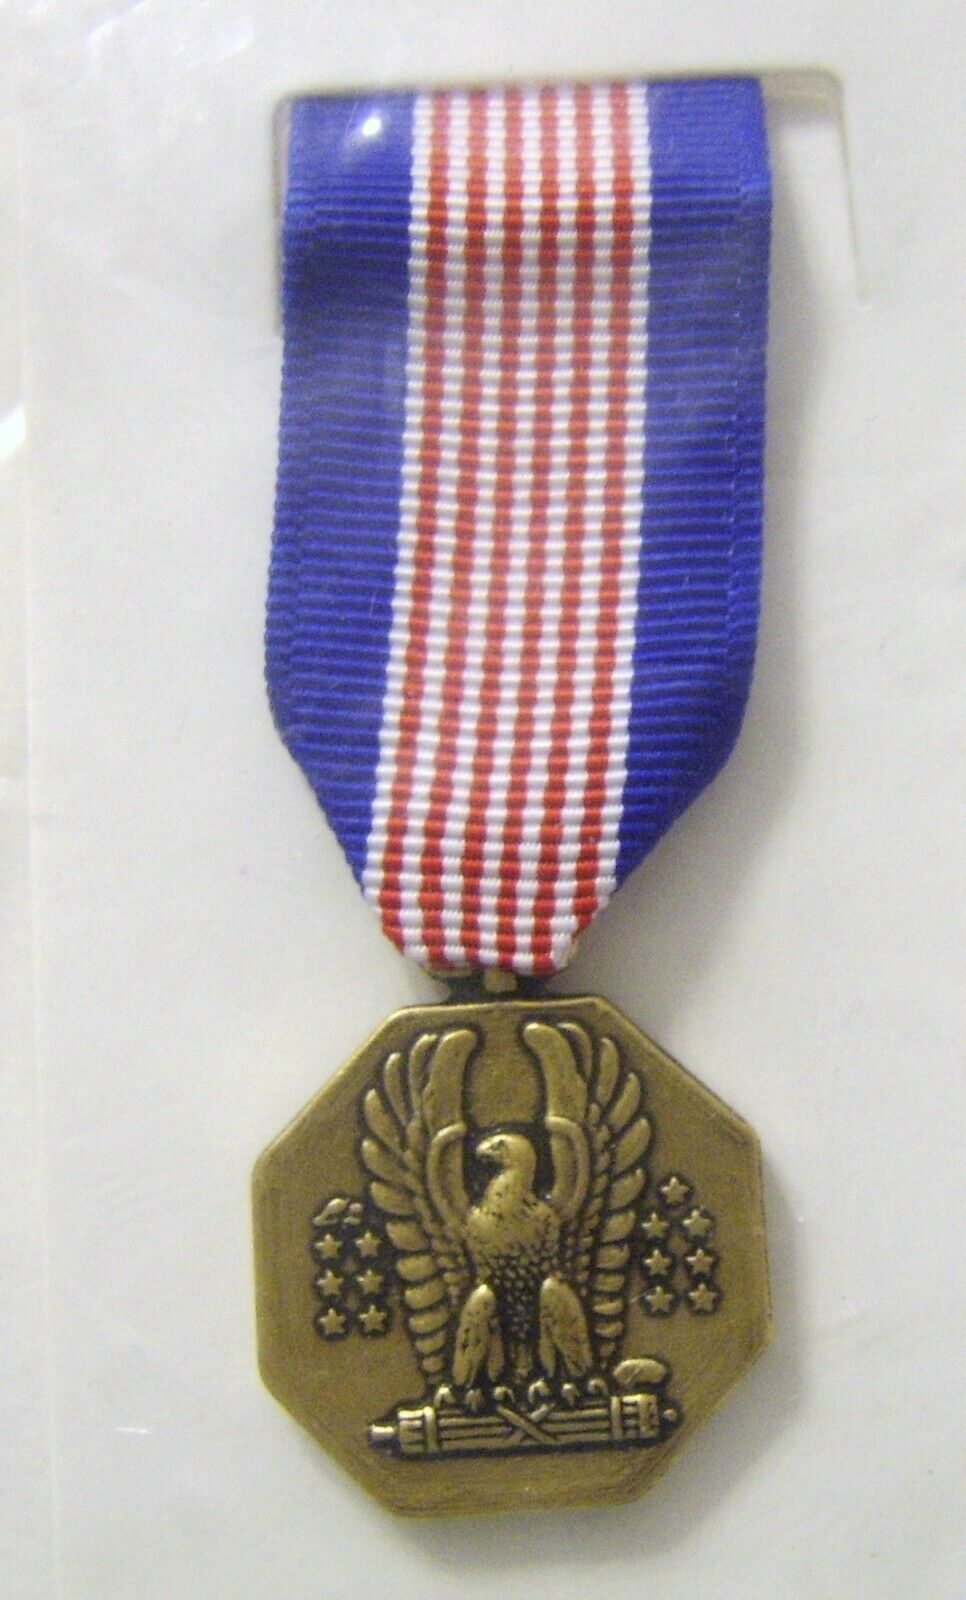 Primary image for SOLDIER'S MEDAL - MINIATURE SIZE